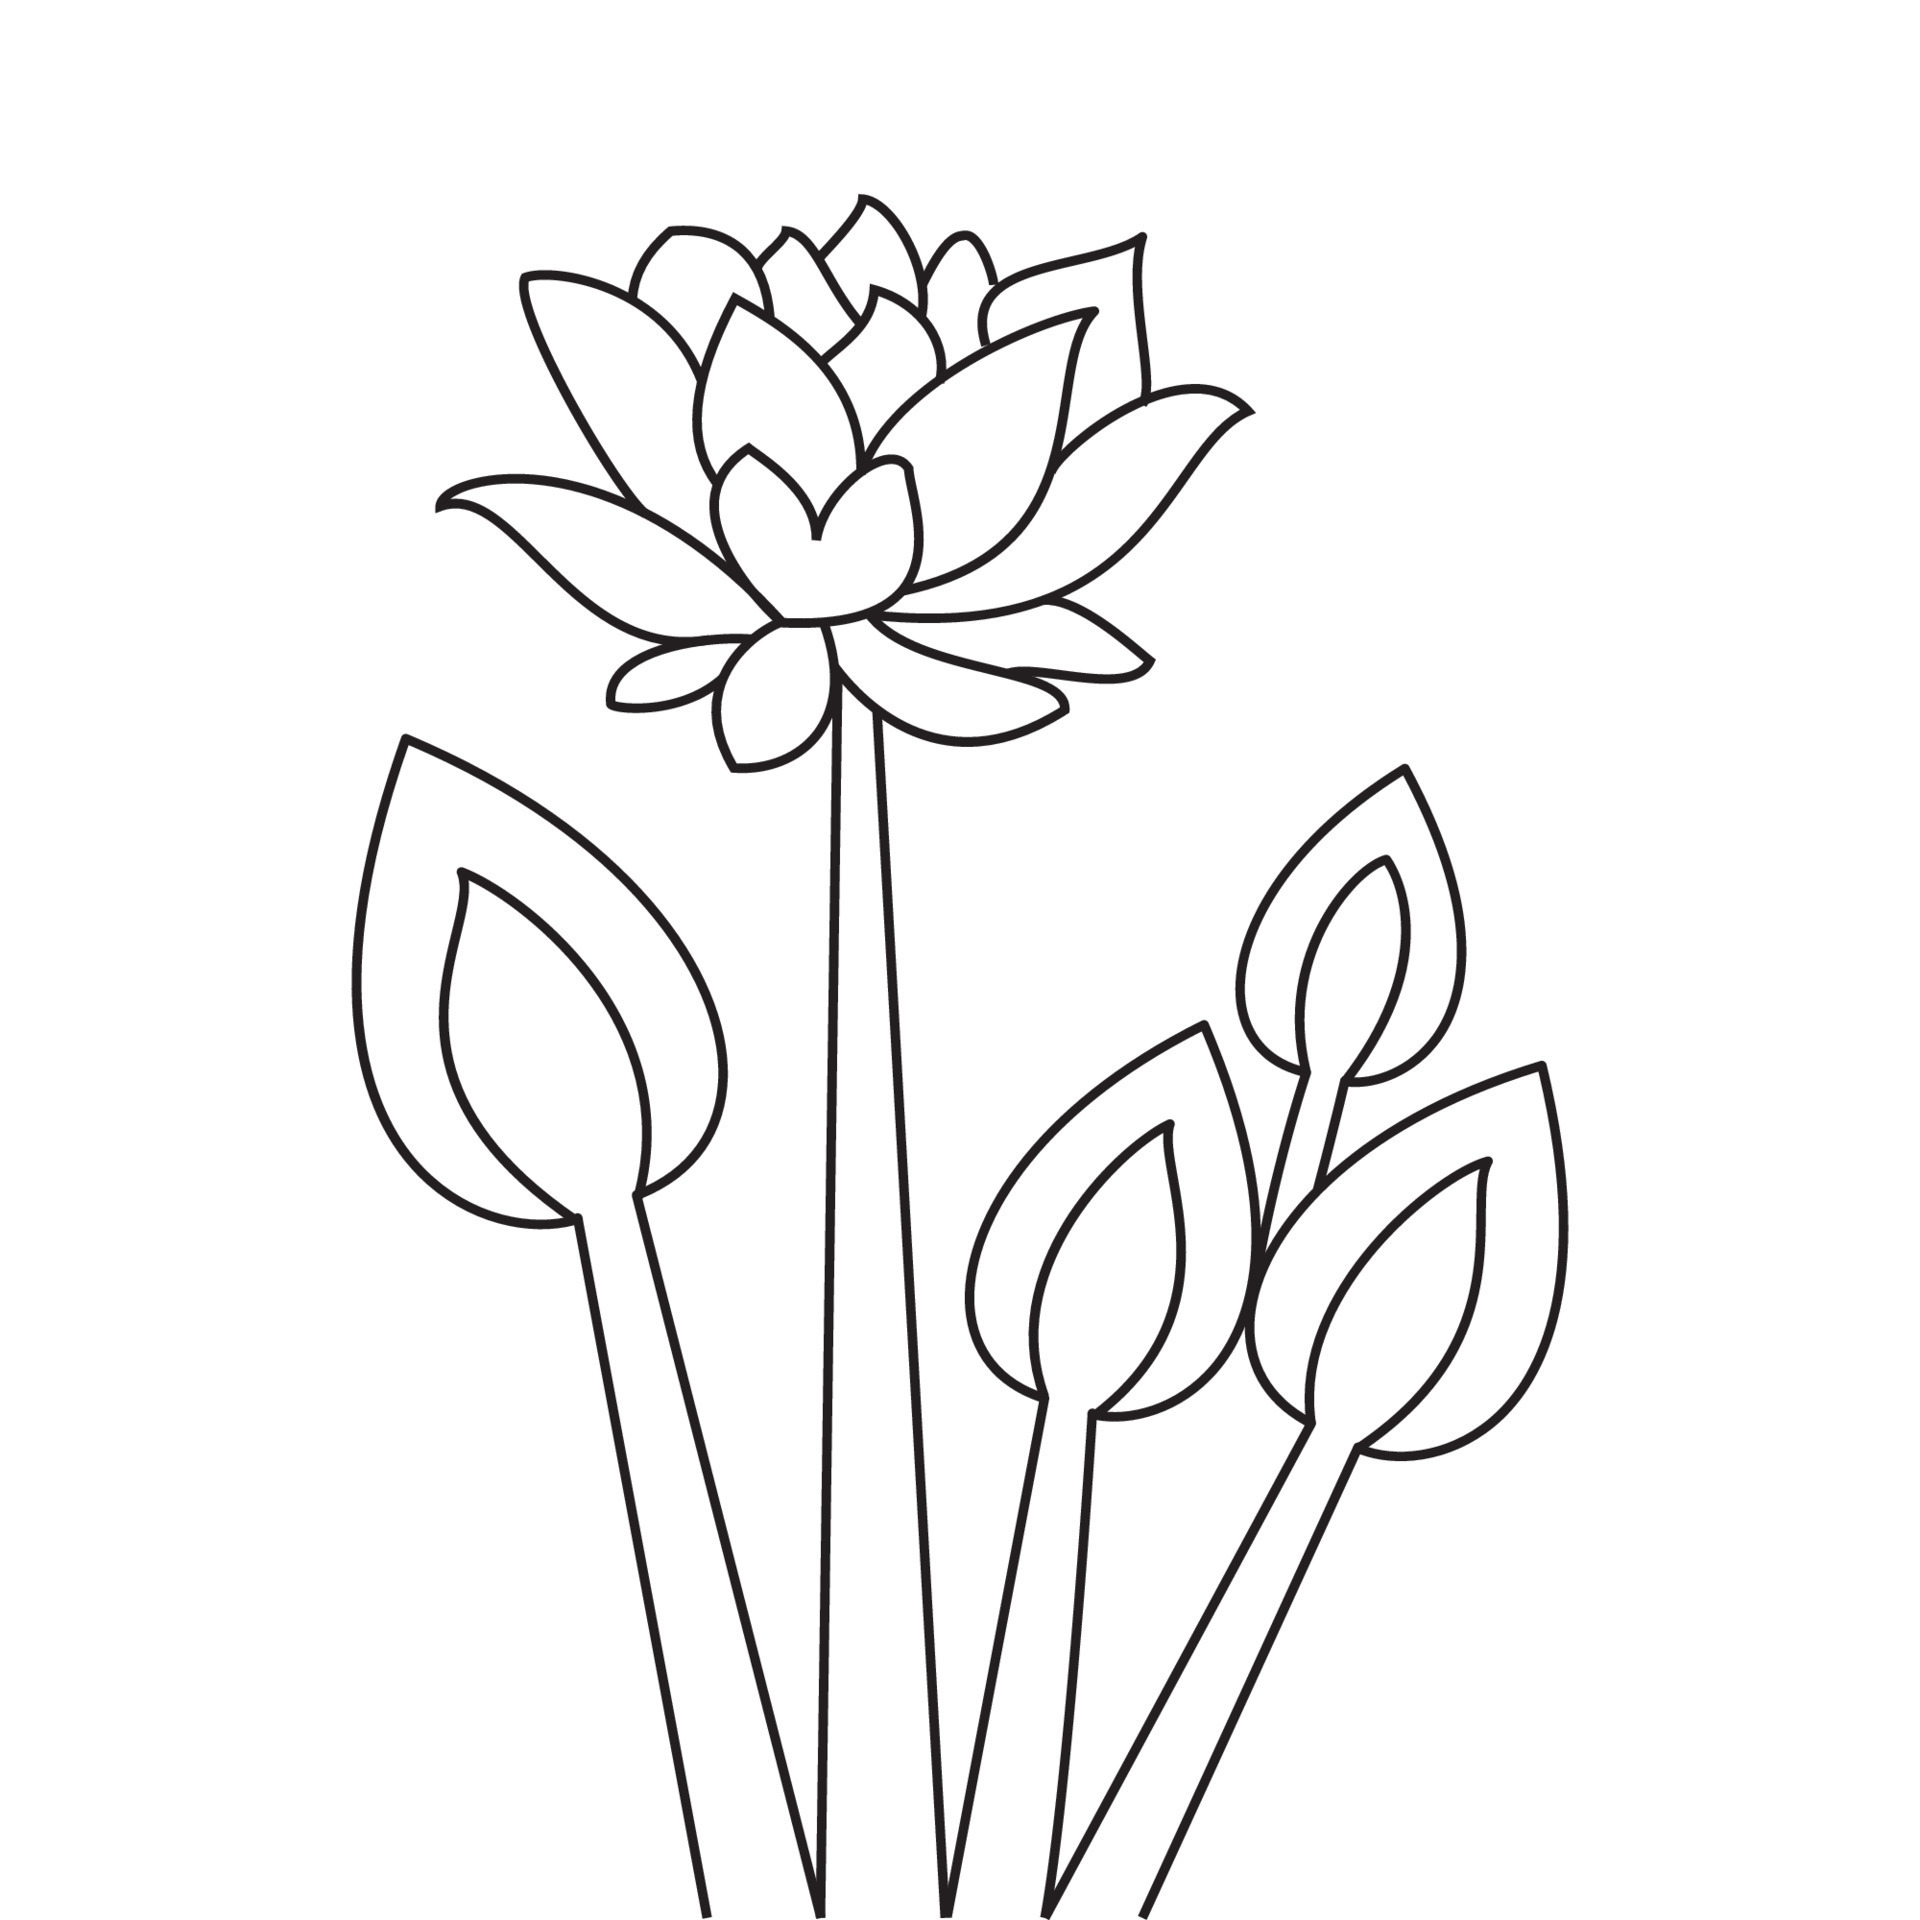 How To Draw A Lotus Flower - Step By Step Guide - Cool Drawing Idea